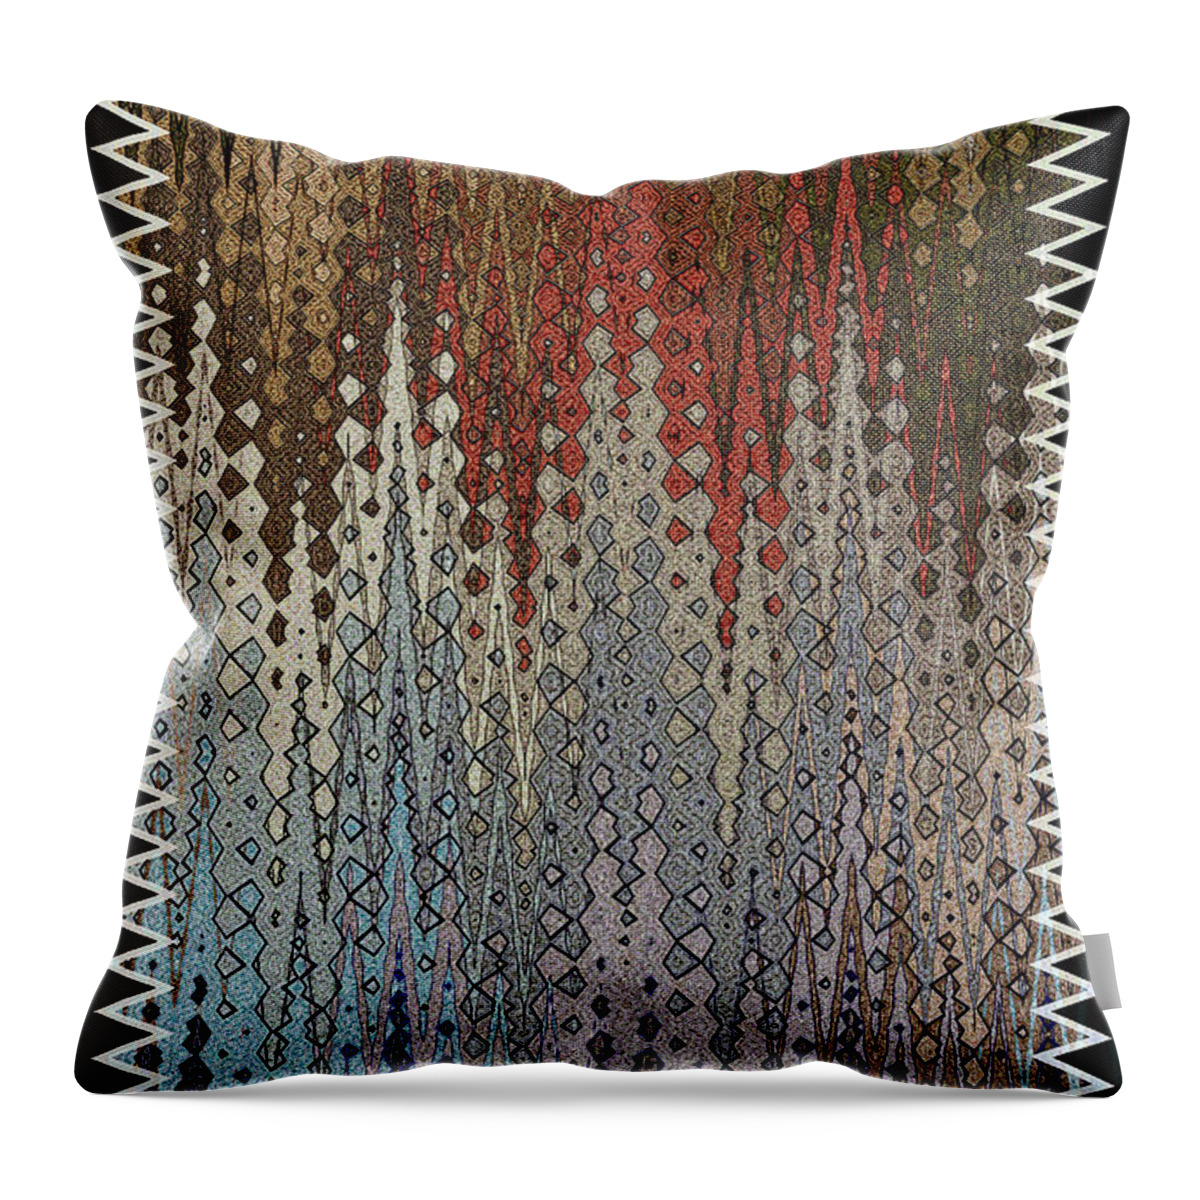 Abstract Floor Pamel Abstract Throw Pillow featuring the digital art Abstract Floor Pamel Abstract by Tom Janca